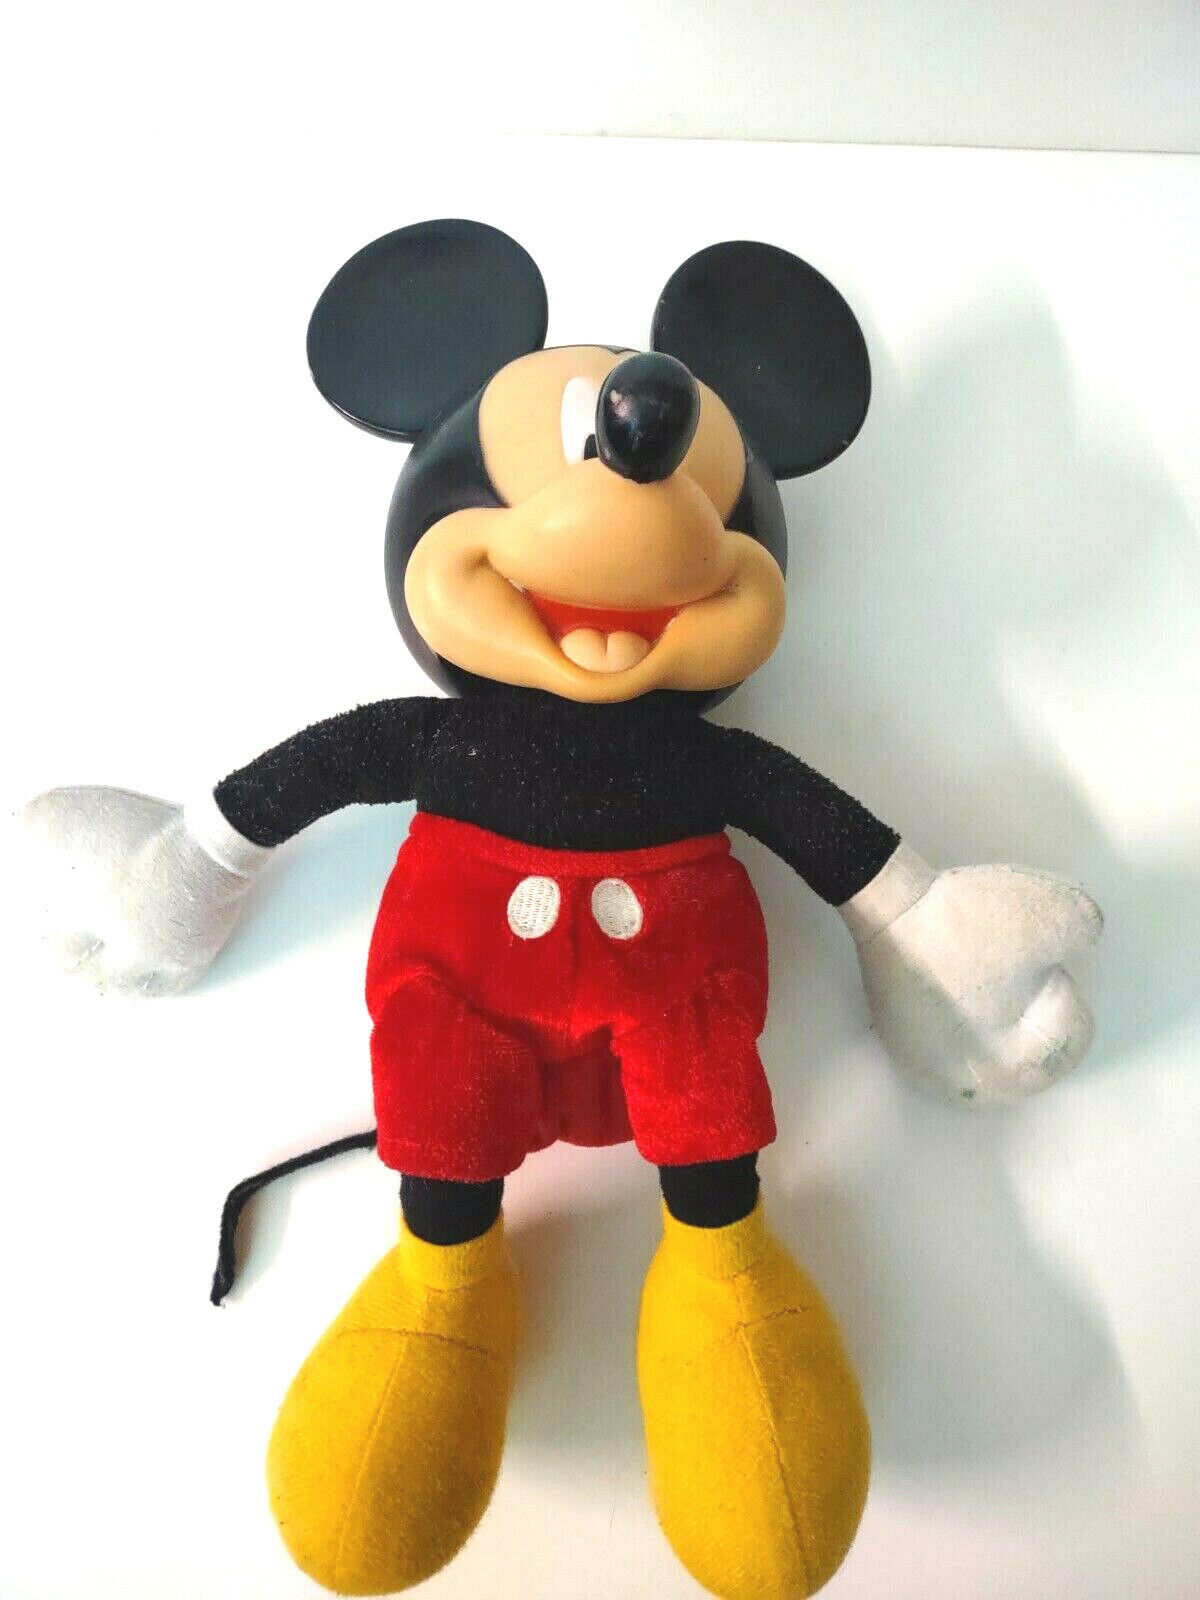 Antique Mickey Mouse Puppet 1968 KCare -Rare Toy - Plastic Head and Plush Body